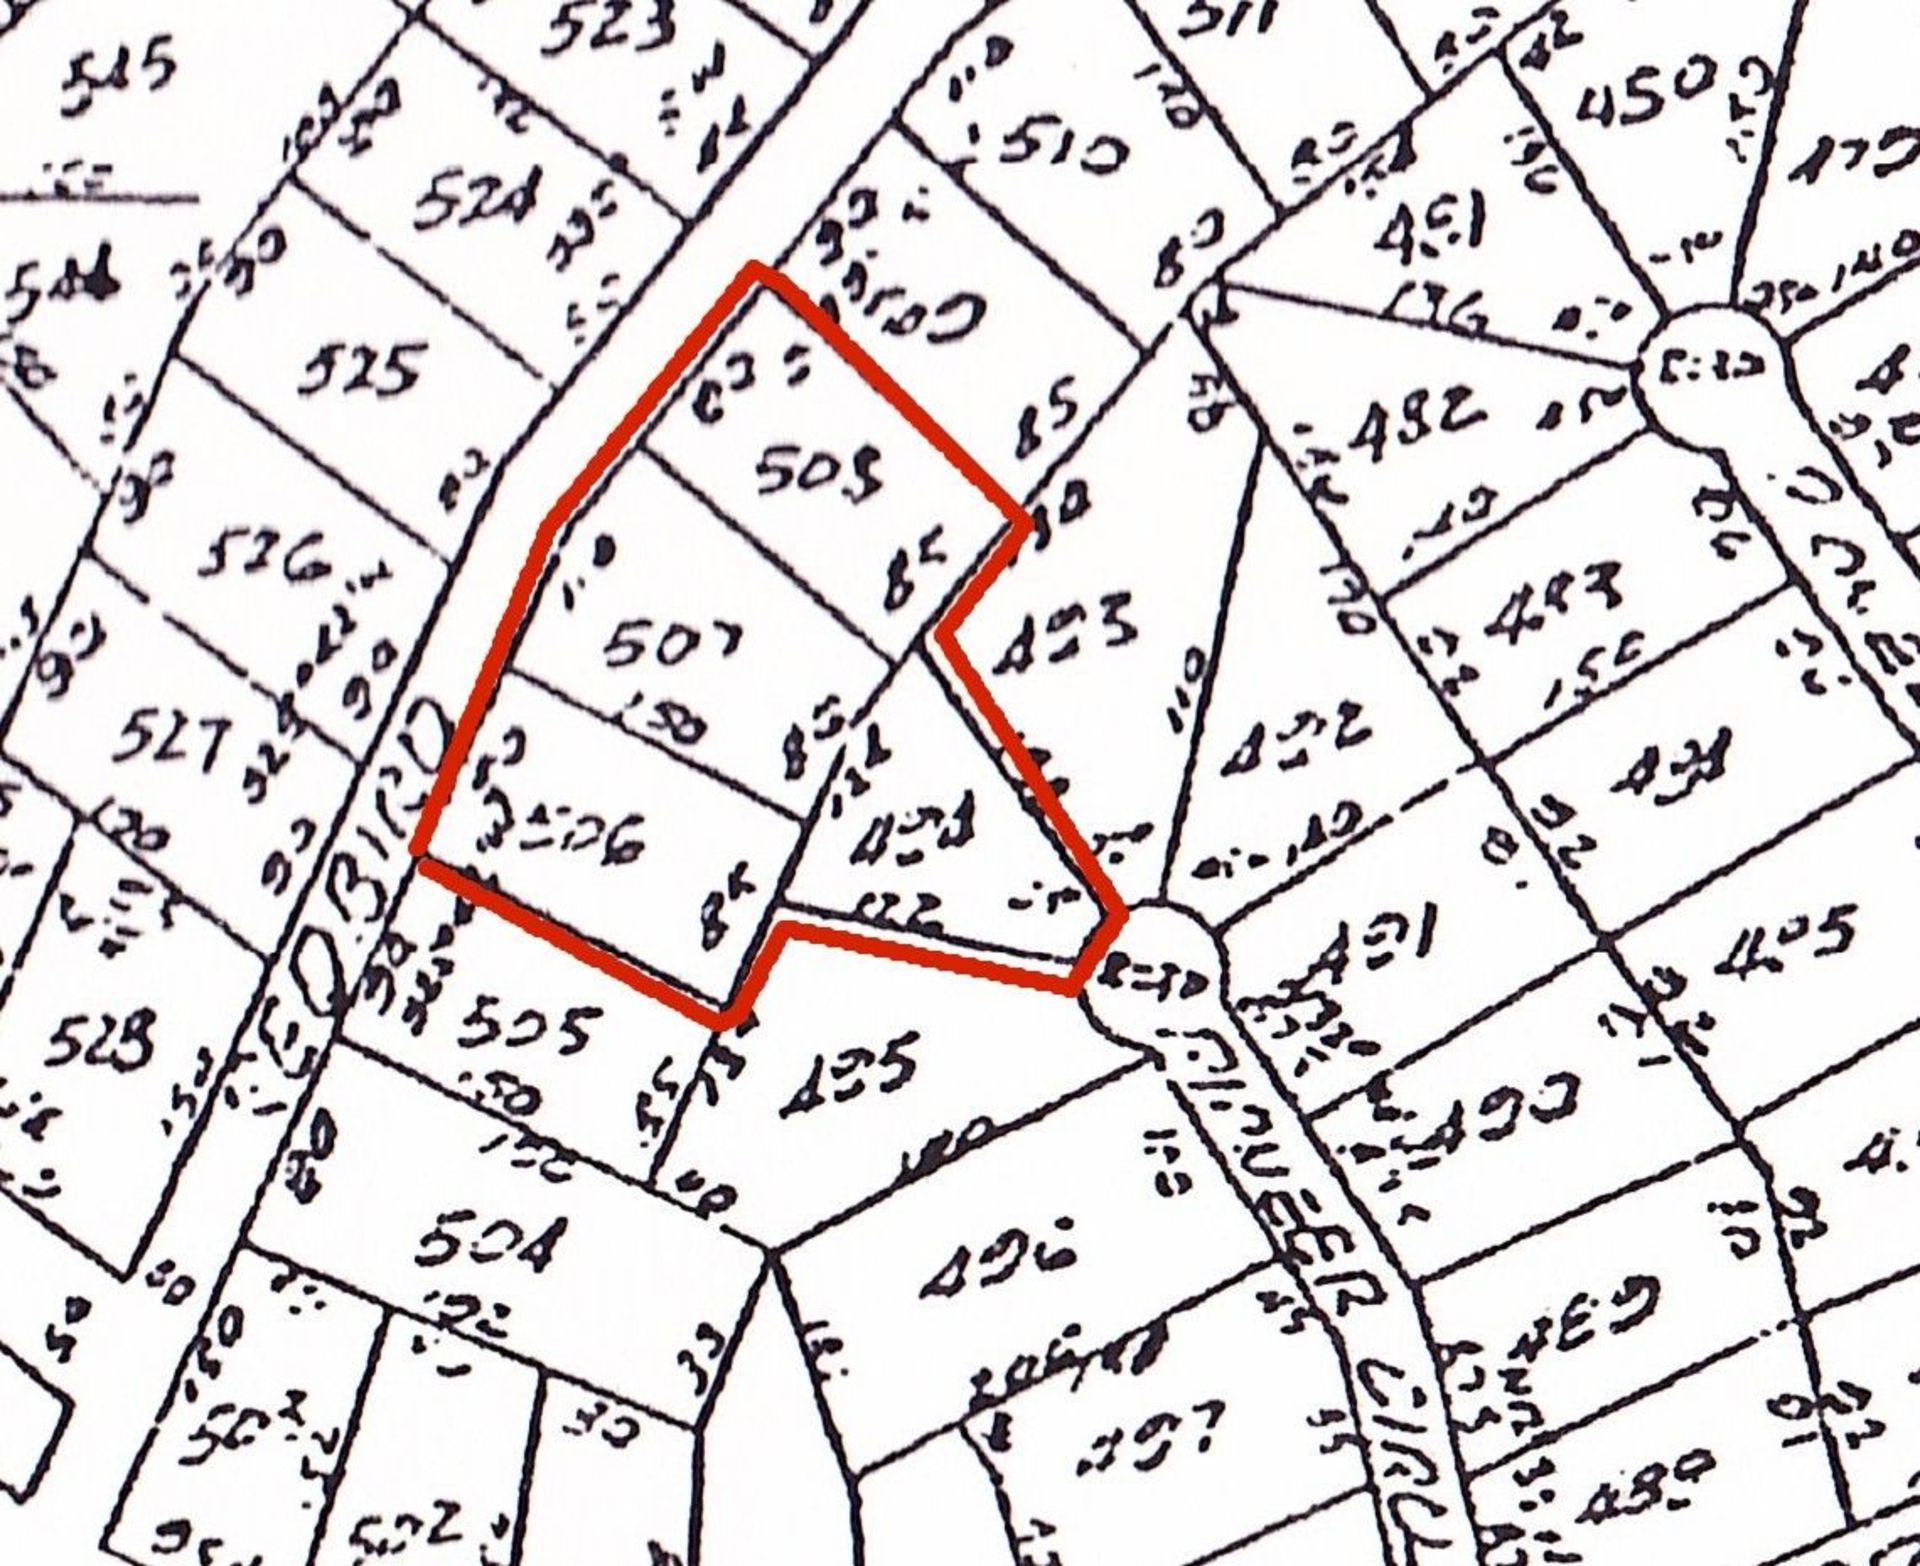 ADJOINING LOTS IN HORSESHOE BEND, ARKANSAS. OWN THE DREAM..! YOU ARE BIDDING FOR PLOT NO. 506.